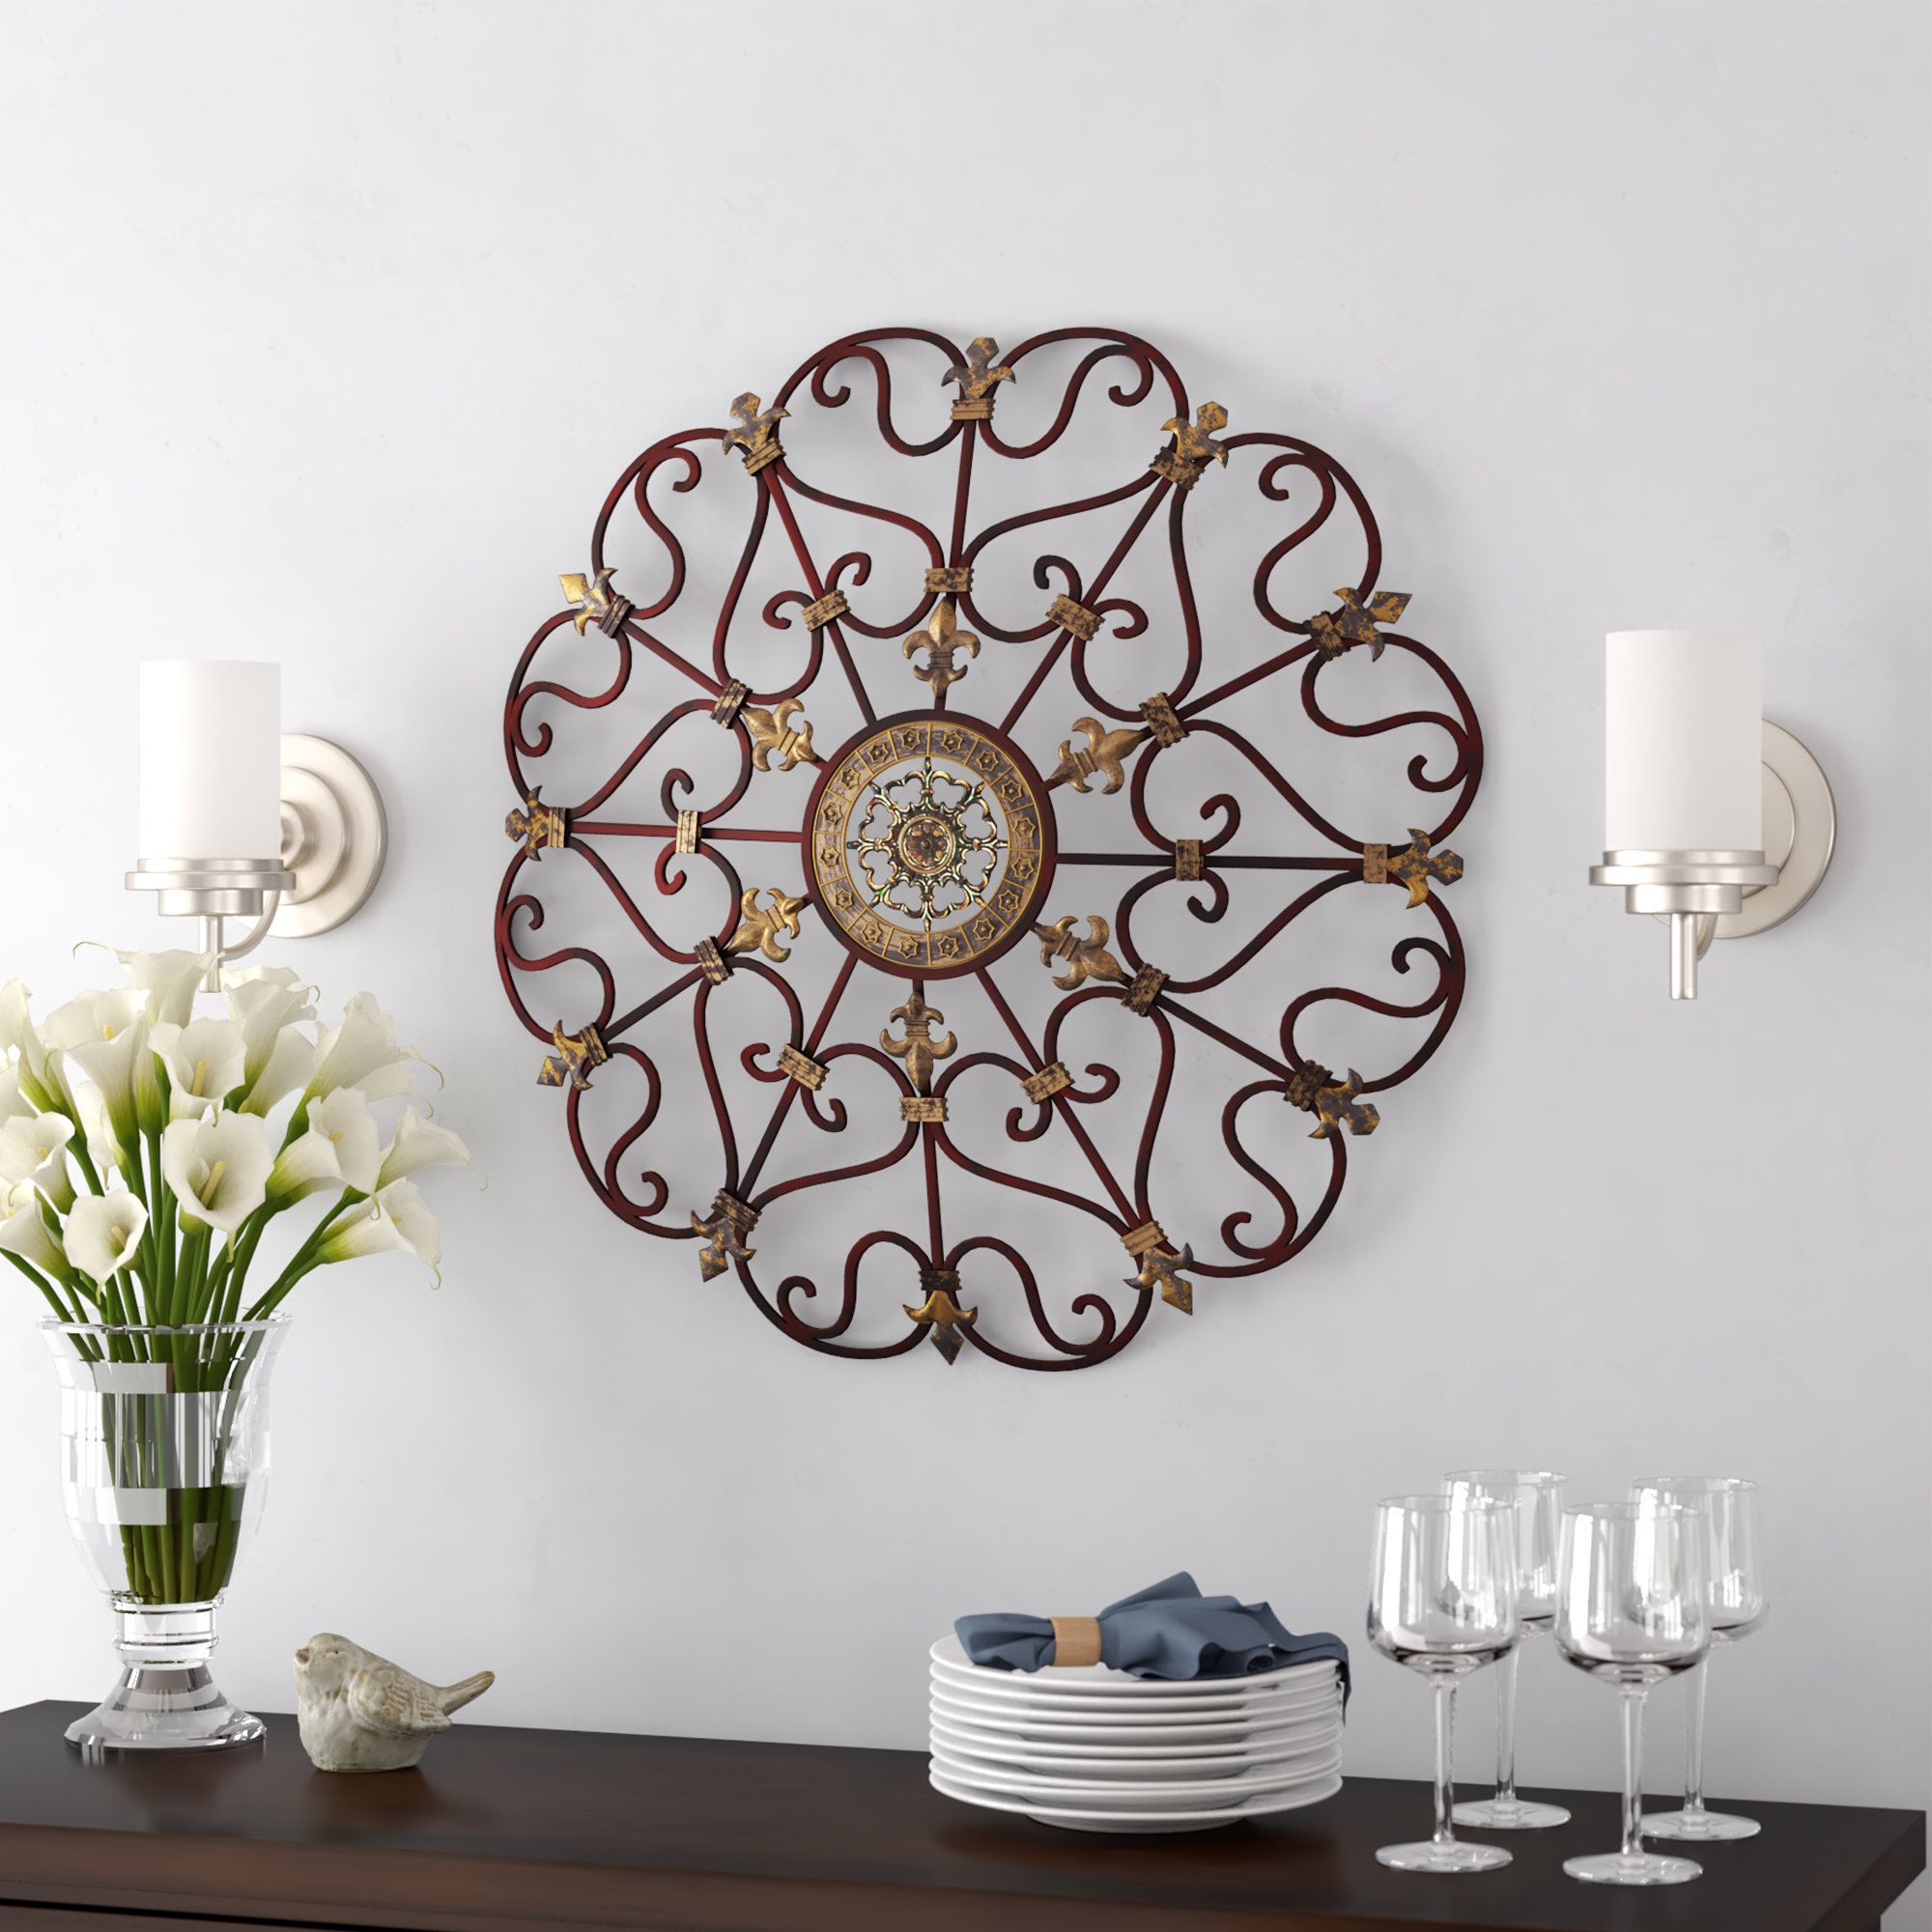 Wall Accents You'll Love In 2019 | Wayfair Inside Raised Star Wall Decor (View 8 of 30)